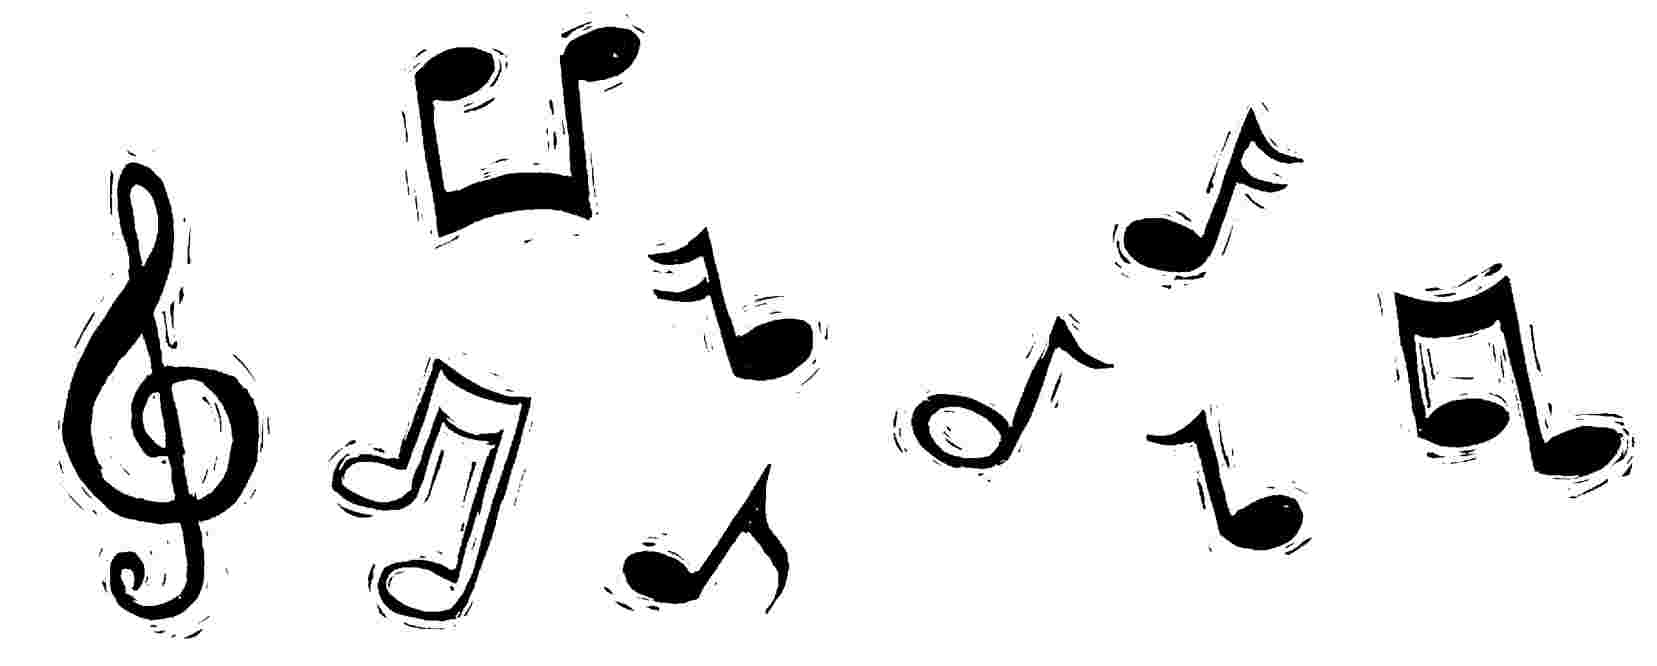 Drawings Of Music Notes - Clipart library